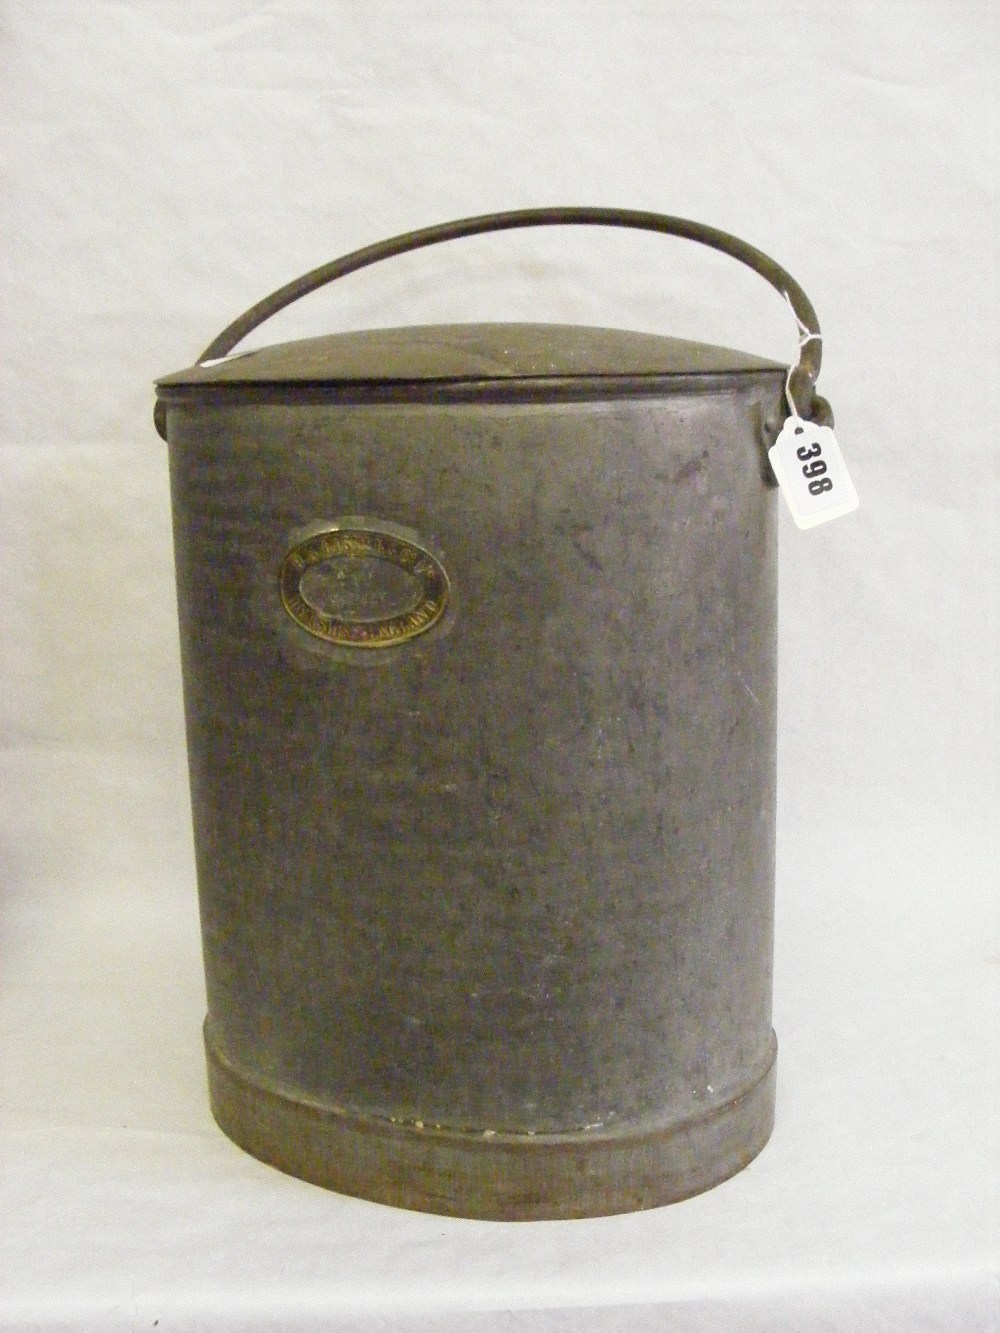 A vintage oval milk churn with handle, stamped R.A. Lister Dursley England.